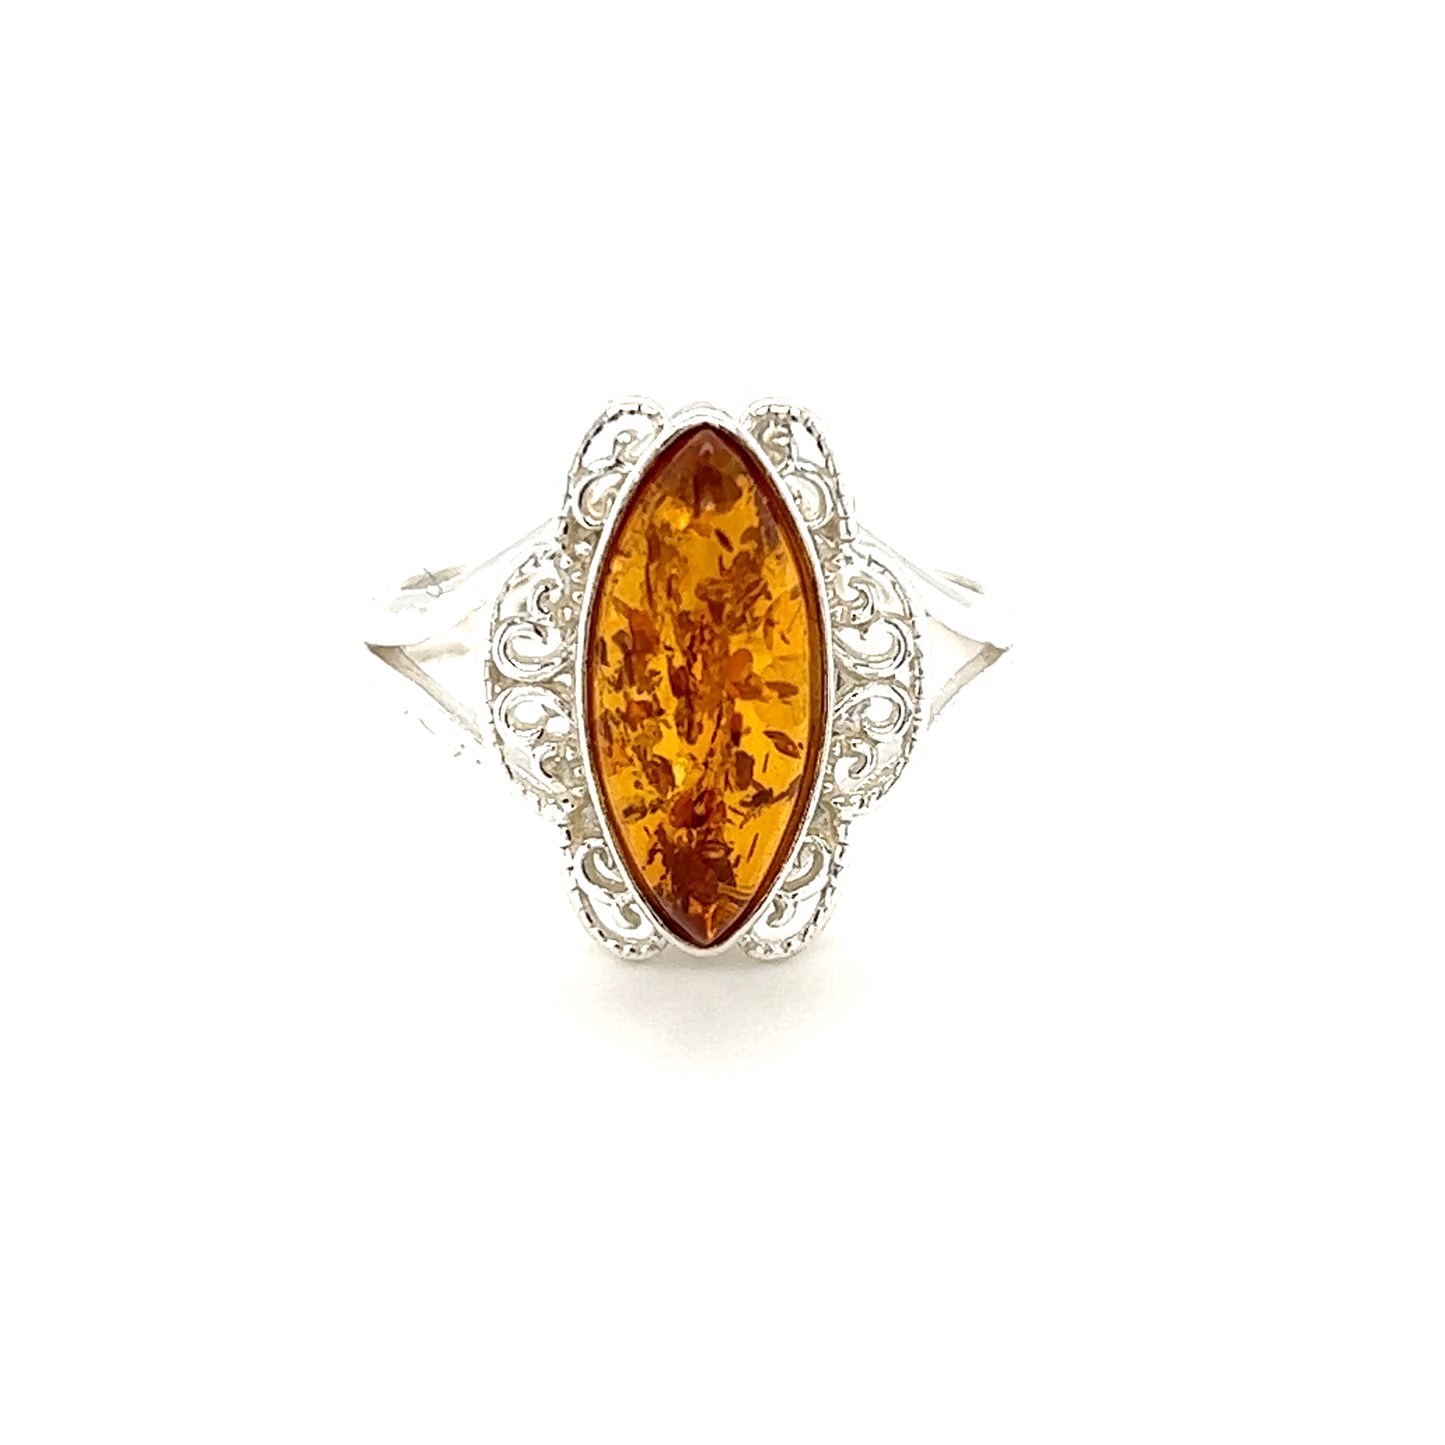 A Filigree Marquise Shaped Adjustable Amber Ring displayed against a white background.